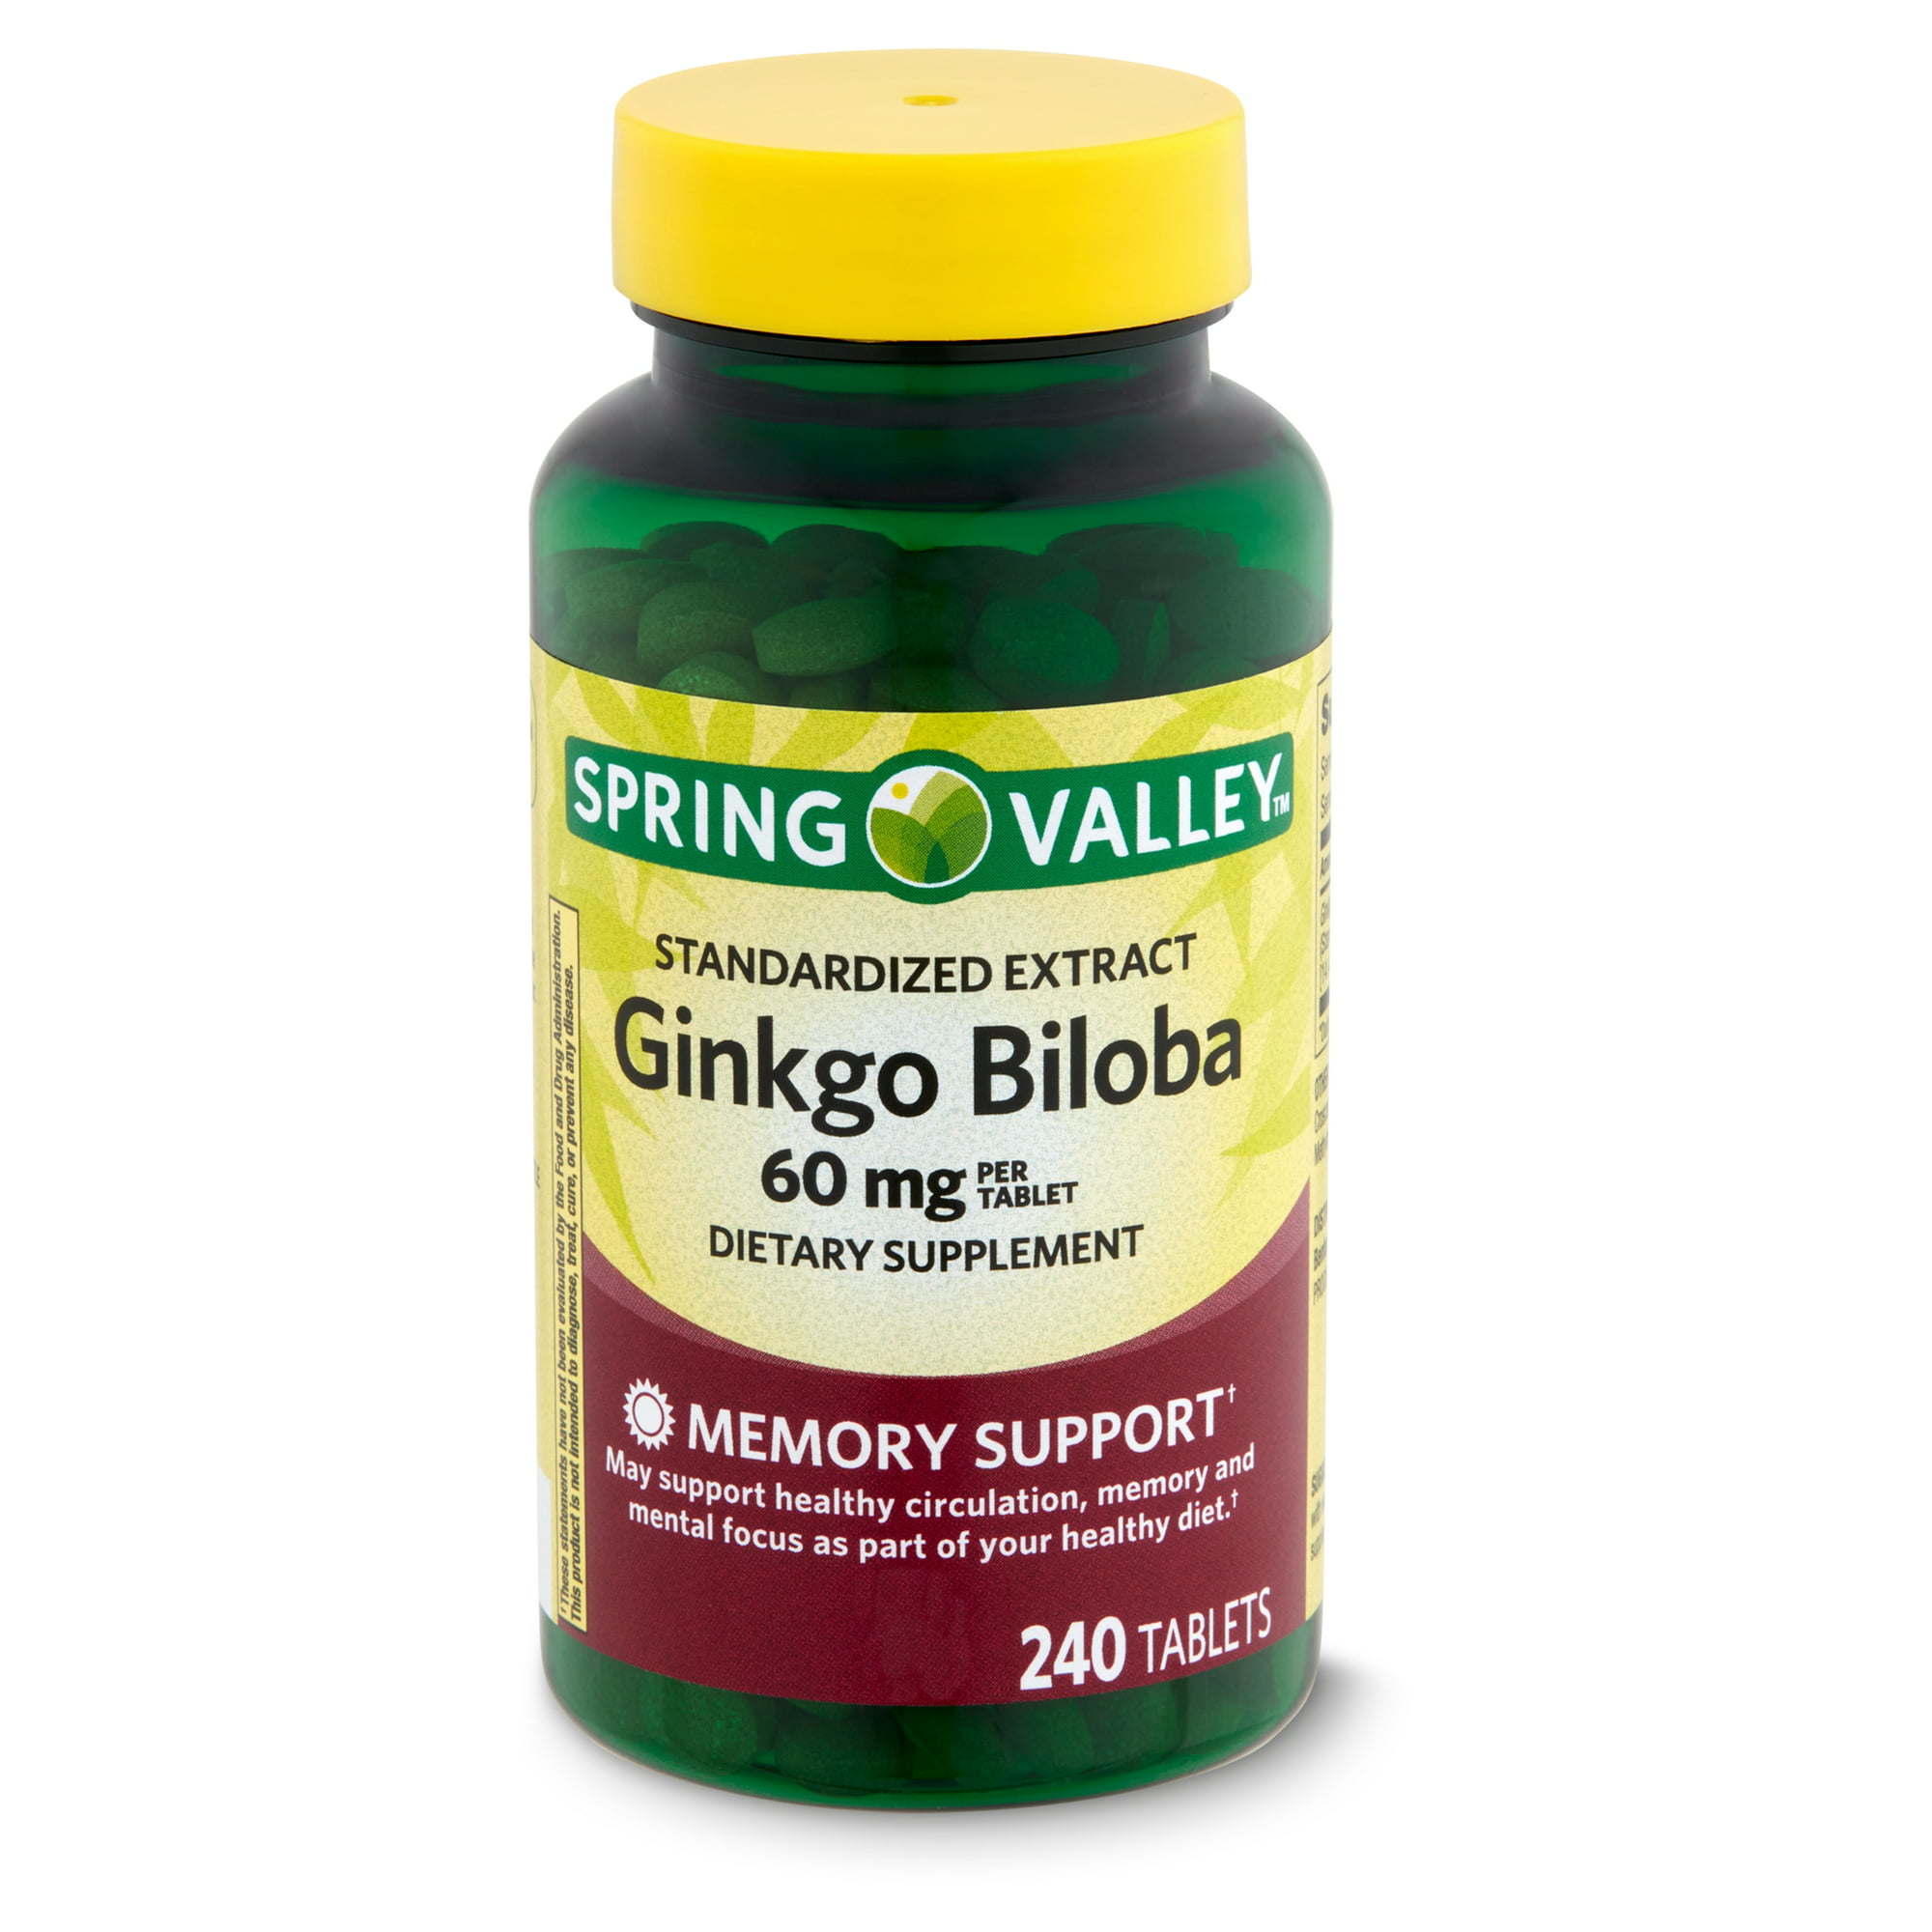 Spring Valley Ginkgo Biloba Dietary Supplement - Standardized Extract, 60mg, 240 Count